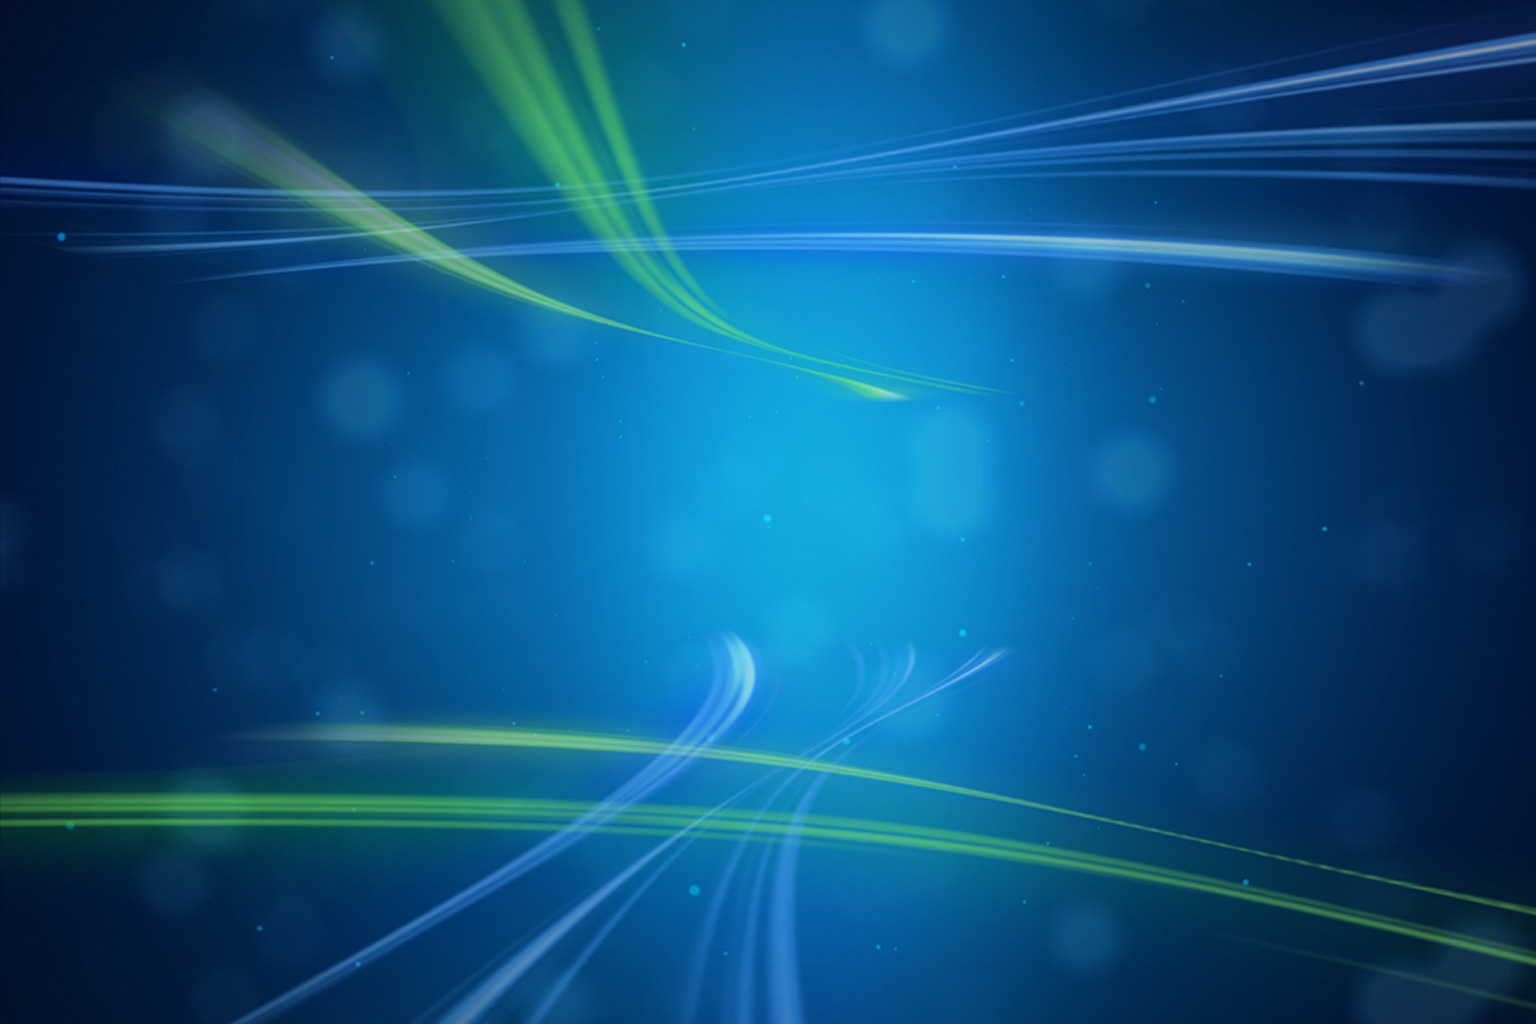 Daily Featured wallpaper   Blue Abstract HTC   HQ Wallpapers   HQ